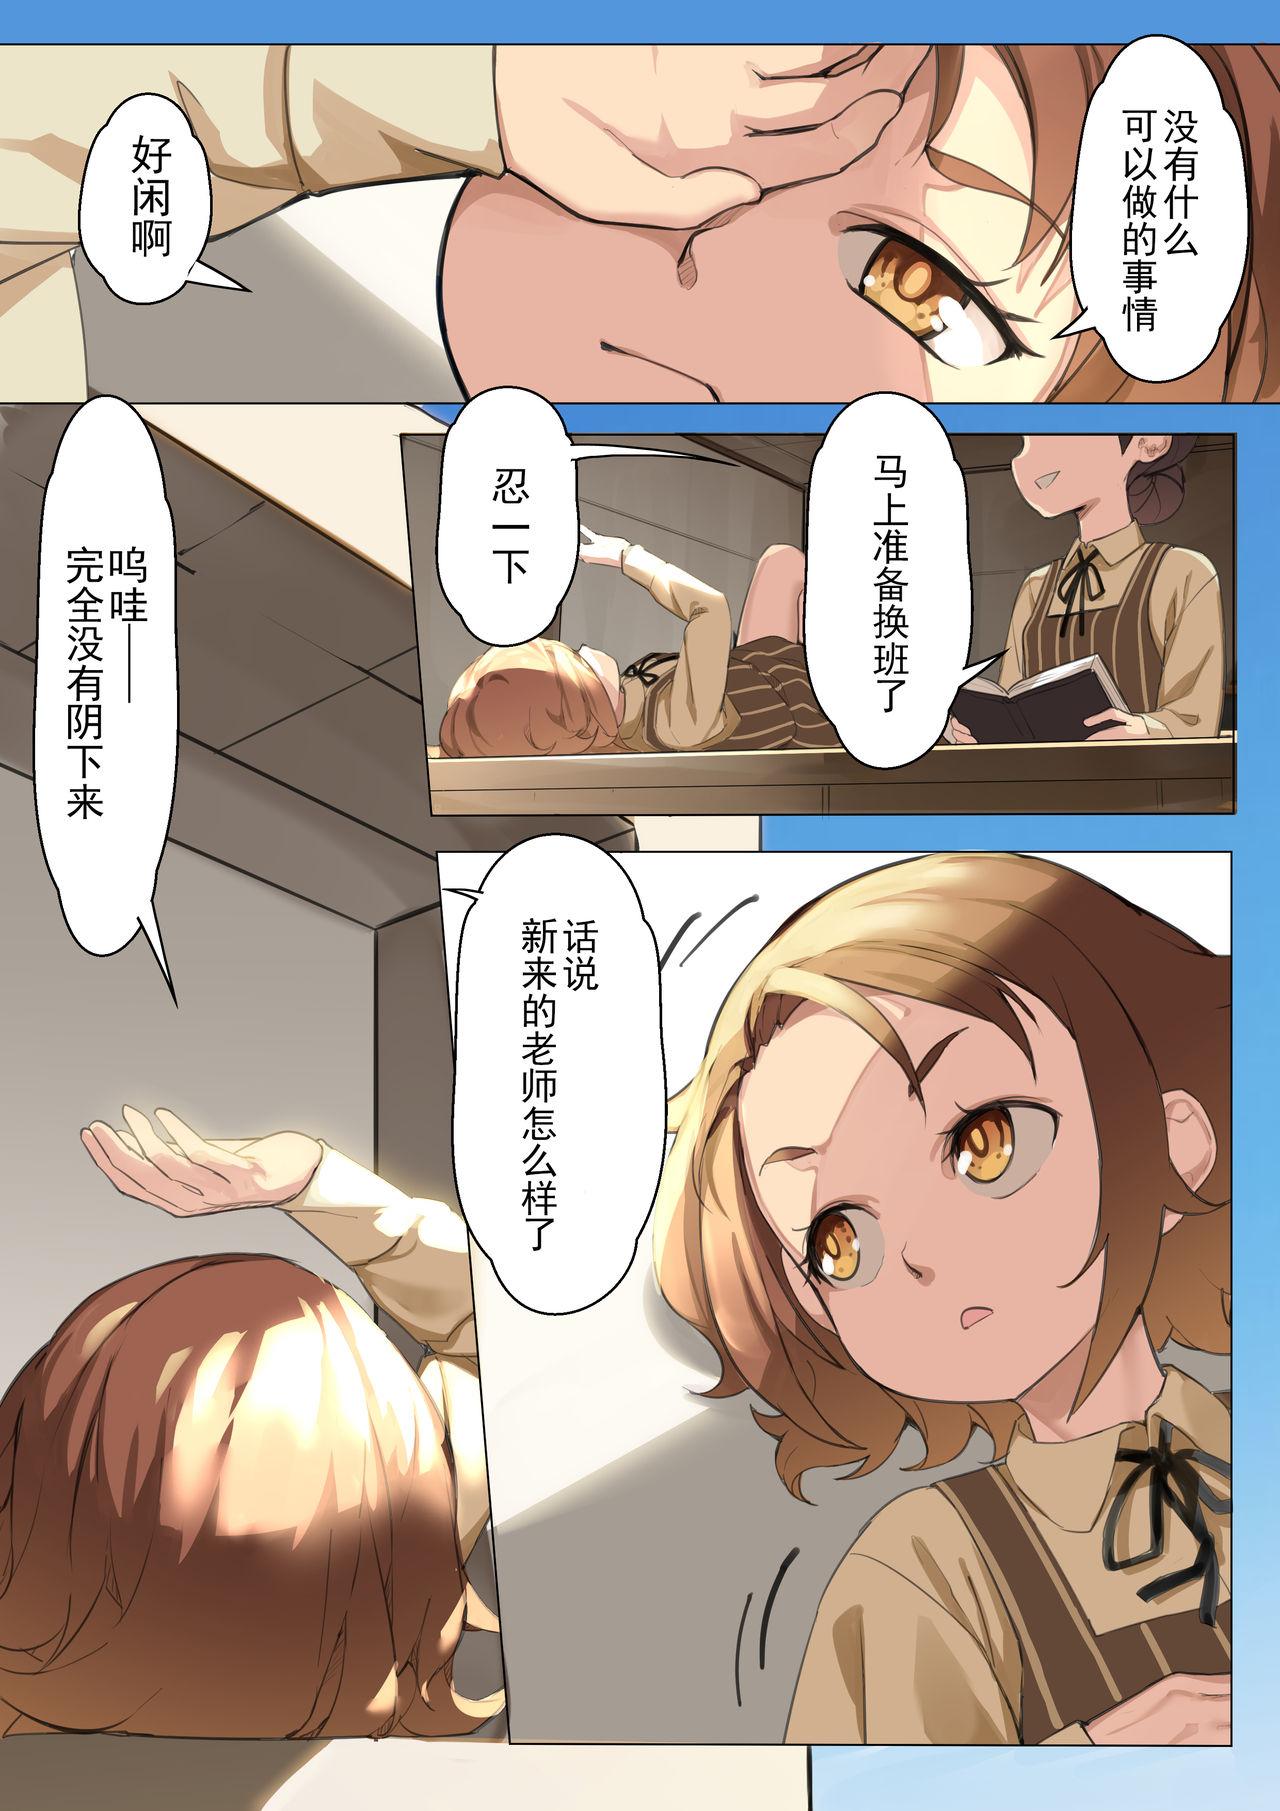 From (同人誌) [BLVEFO9] 乙女の特異性 - 第03話 (オリジナル)[Chinese]【不可视汉化】 - Original Picked Up - Page 12